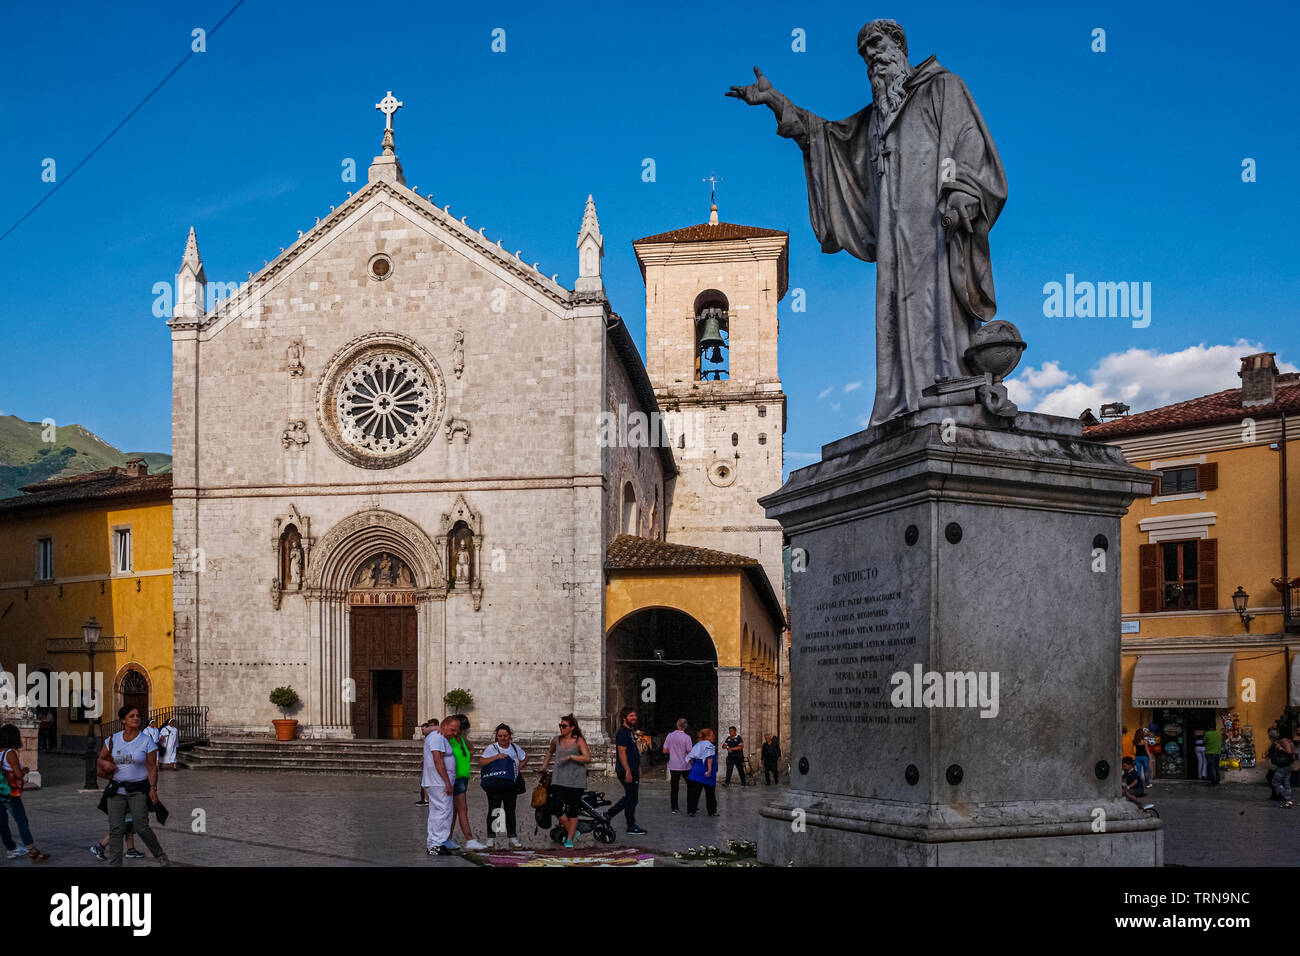 Italy Umbria Norcia - Piazza San Benedetto - statue of Saint benedict and cathedral Stock Photo